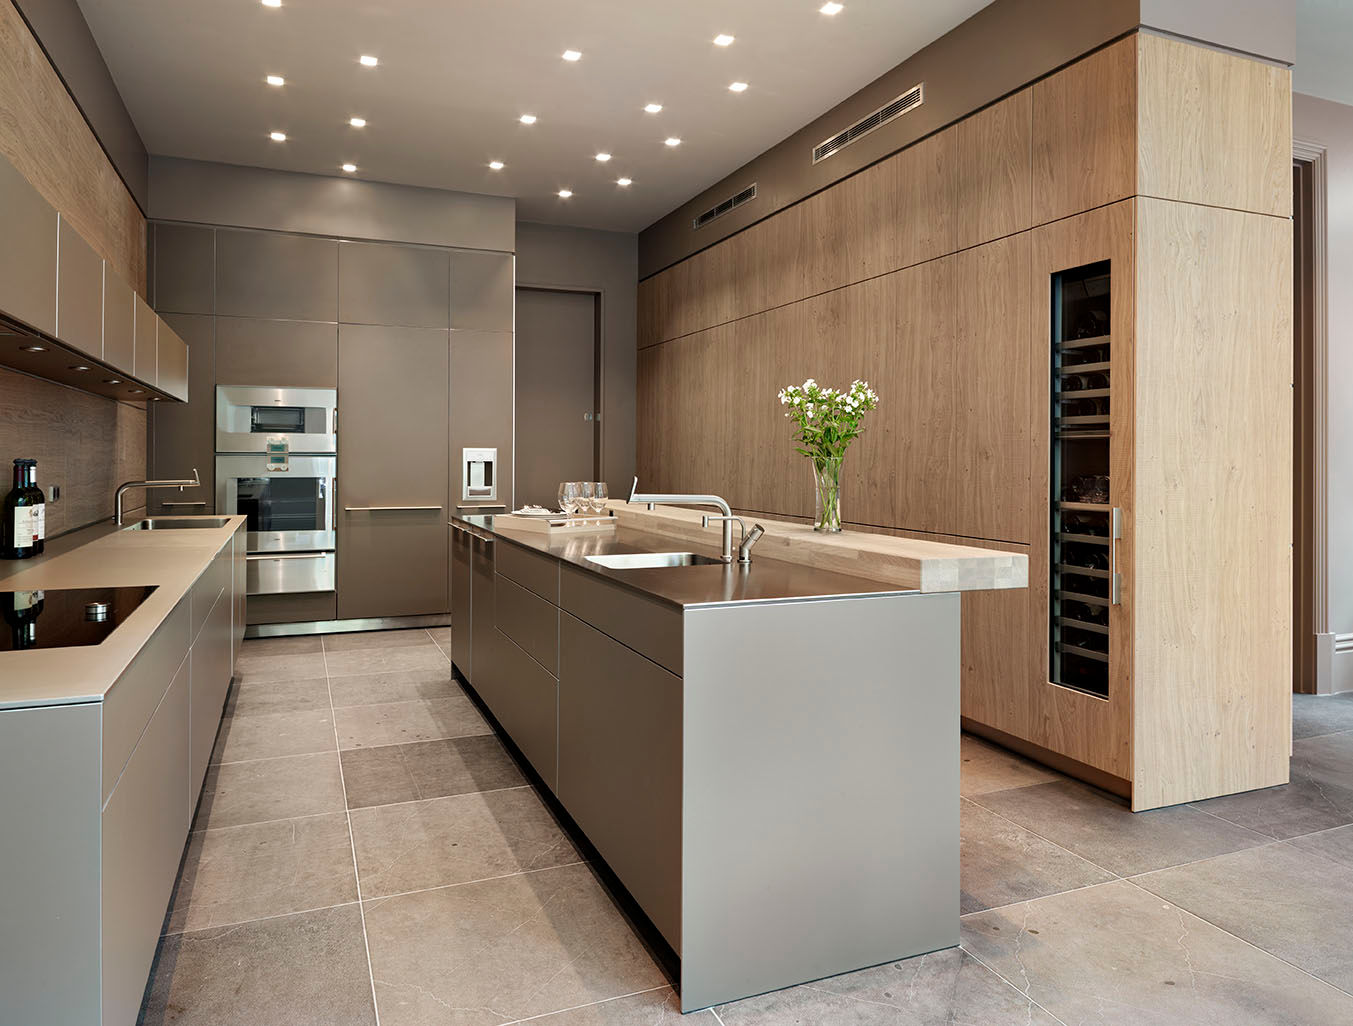 Grand dining Kitchen Architecture Moderne keukens kitchen architecture,bulthaup,bulthaup b3,bespoke kitchen,contemporary kitchen,kitchen island,breakfast bar,integrated kitchen,integrated appliance,wine cooler,gagganau,sociable living